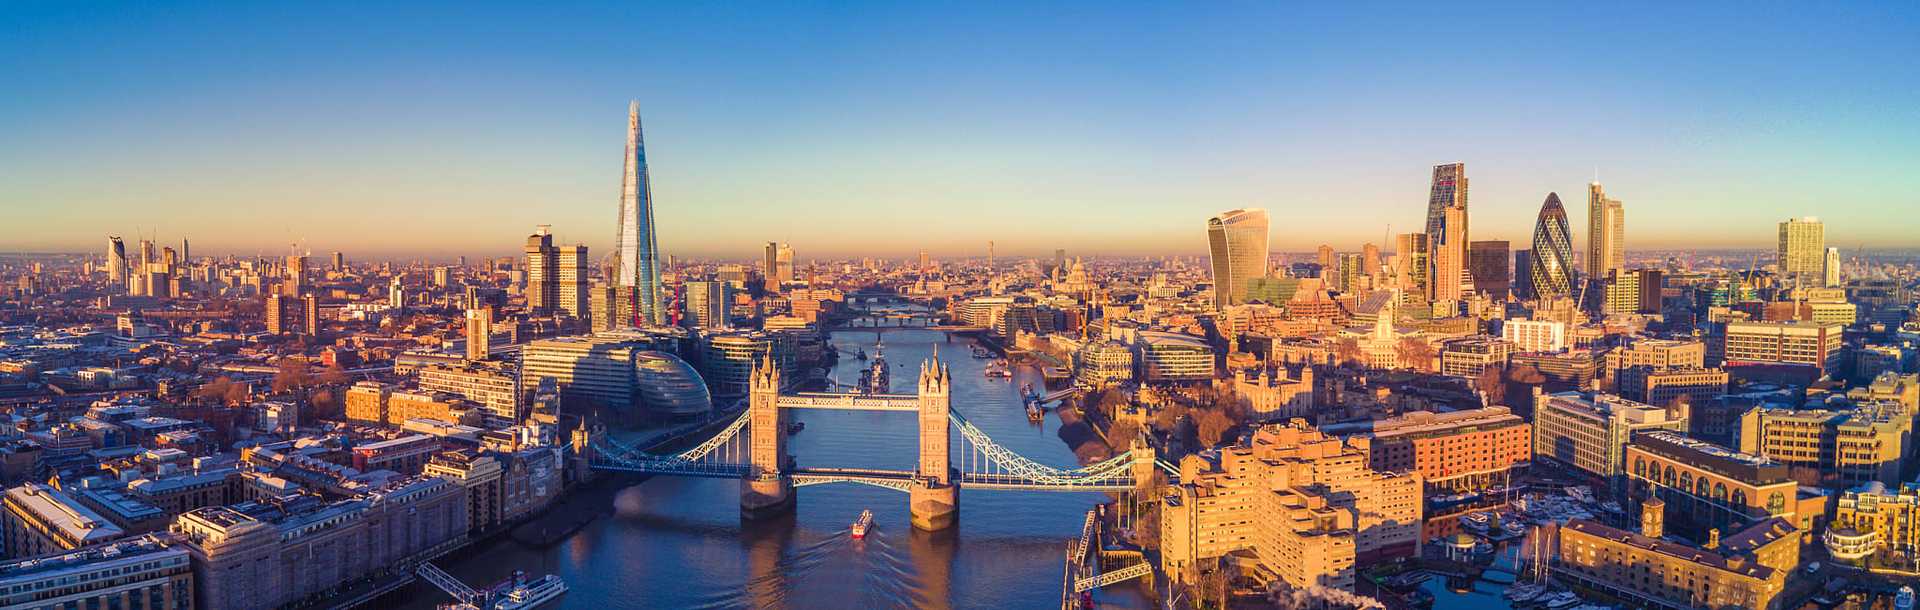 Aerial view of London with the Tower Bridge in England.